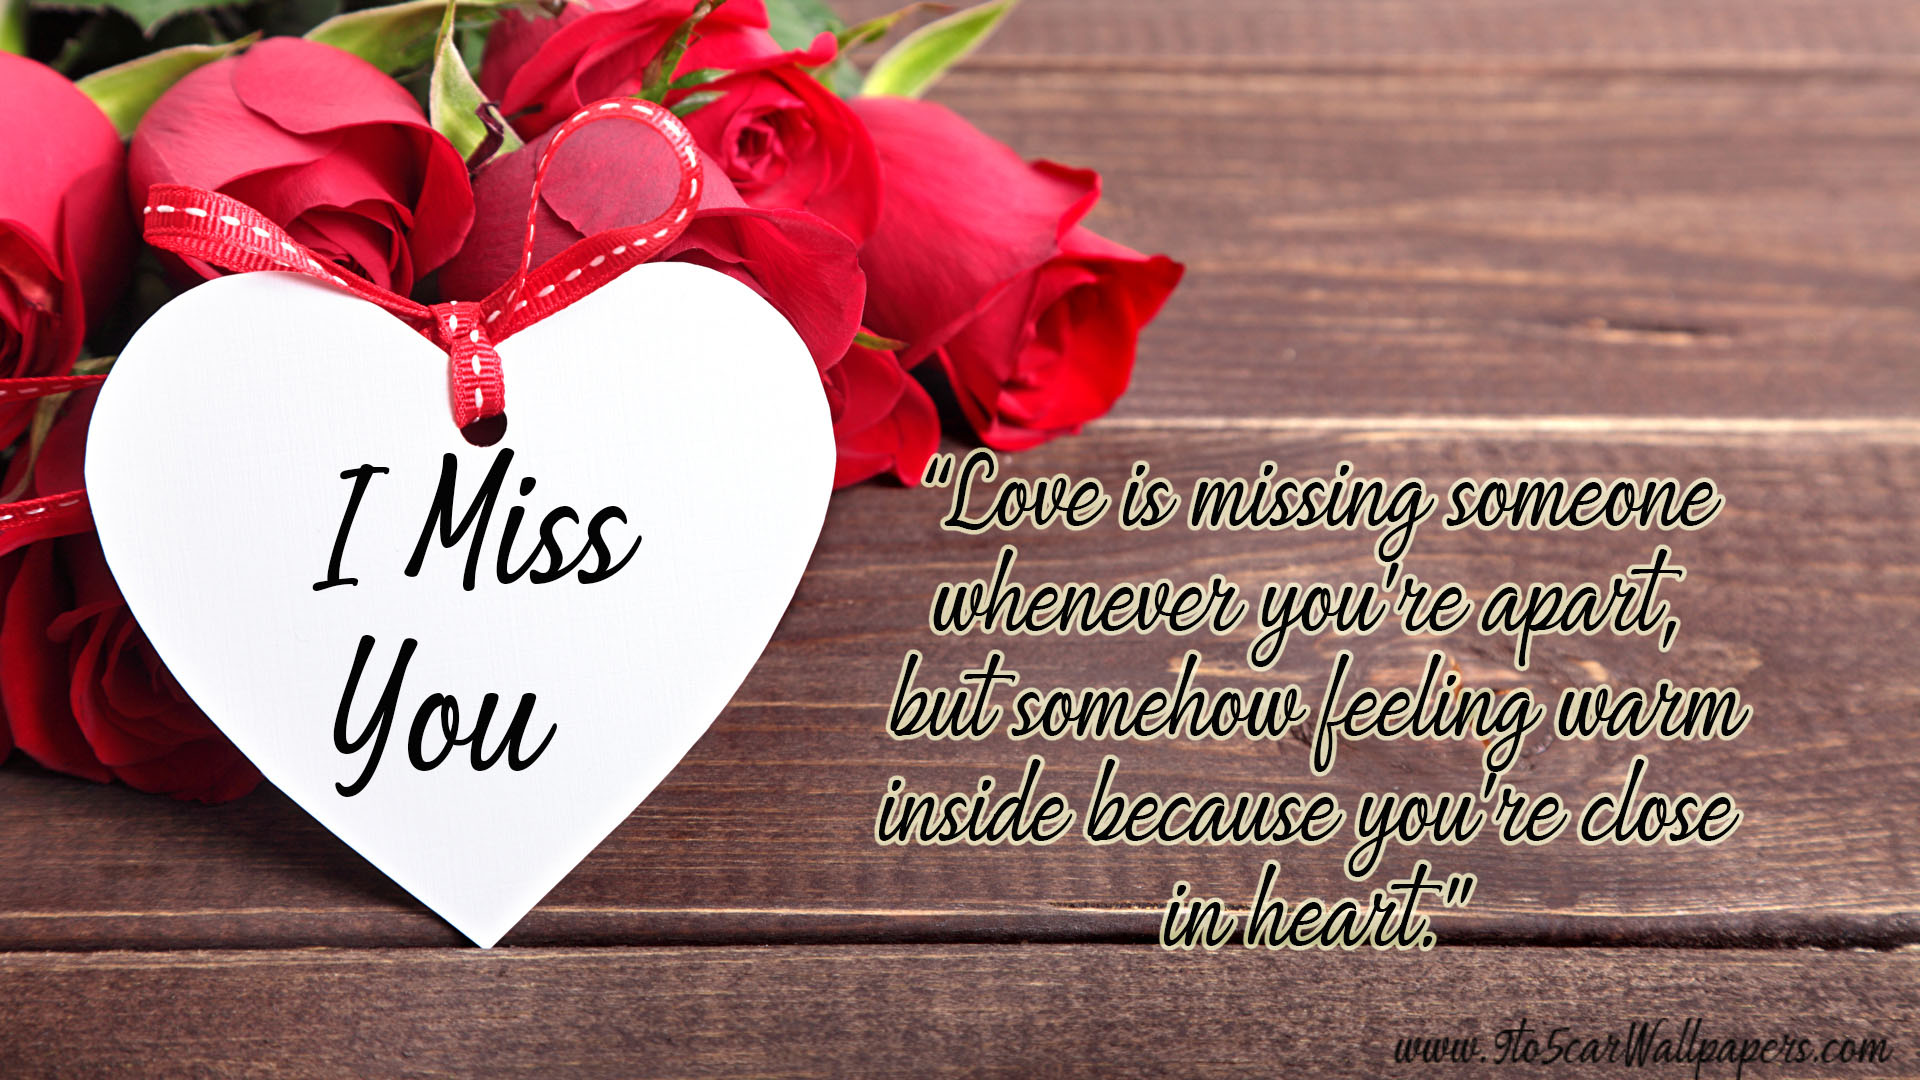 Miss You Quotes for Him - Romantic Picture Messages - Zitations